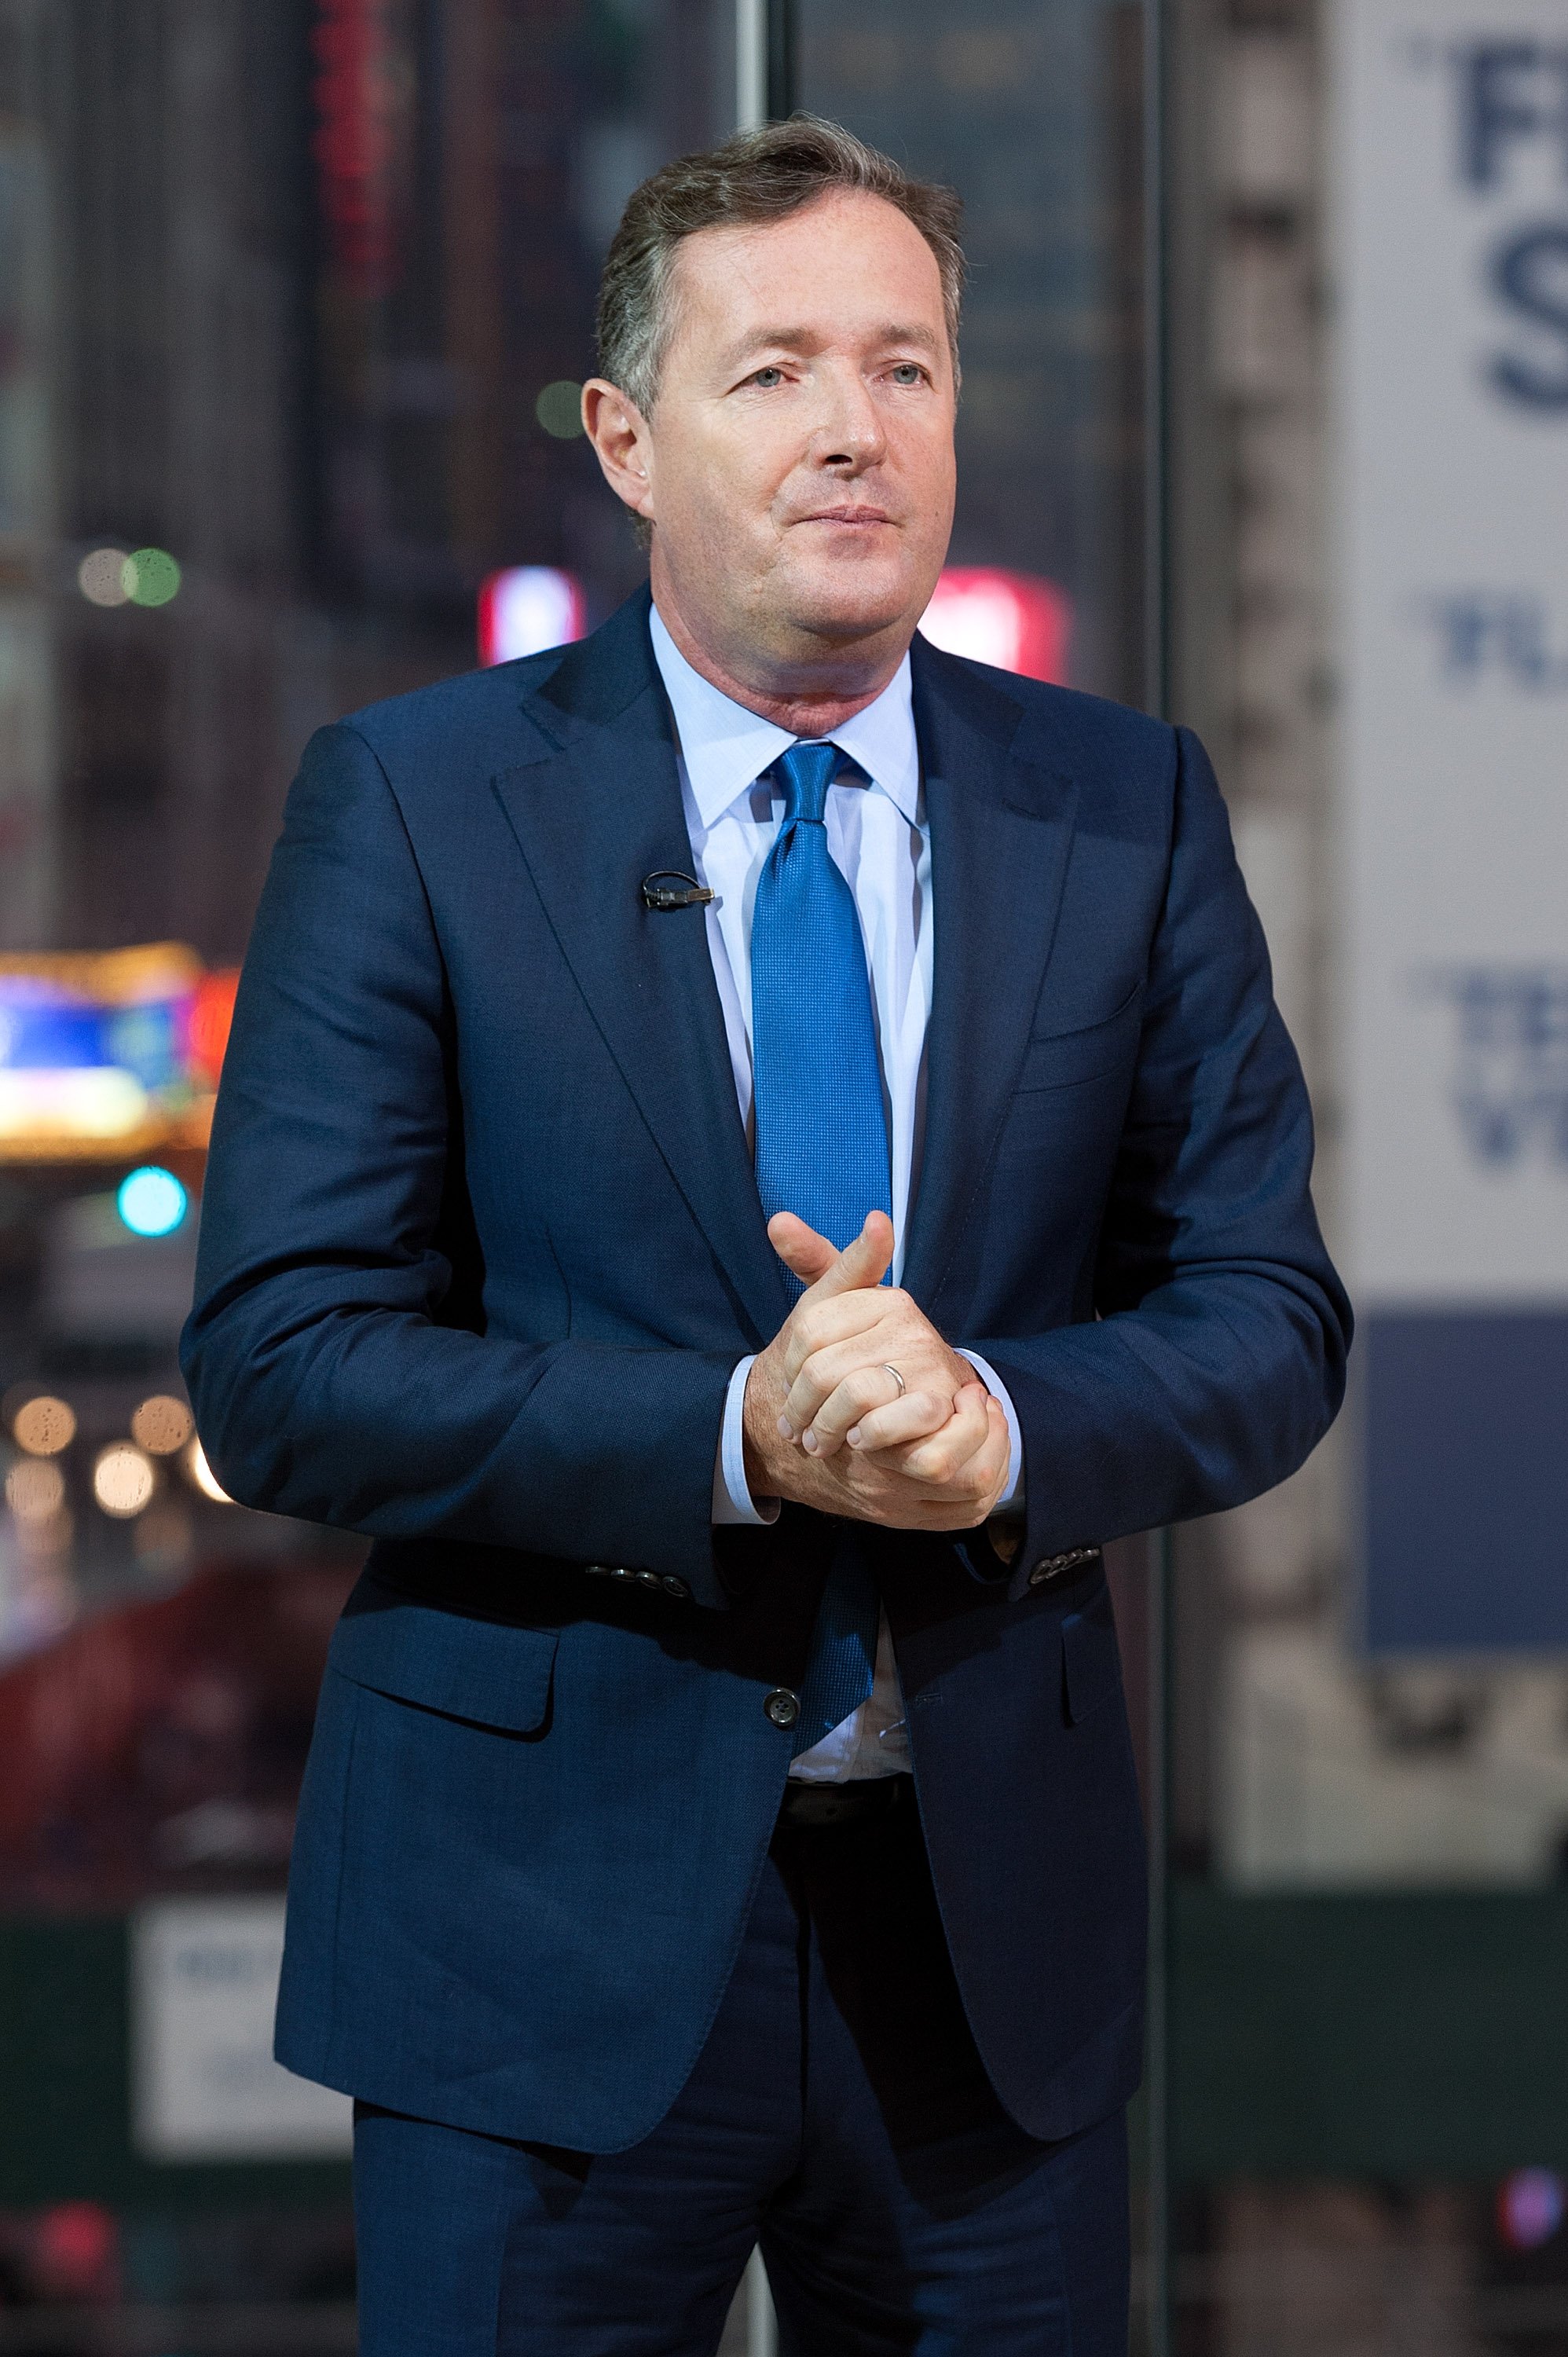 Piers Morgan pictured on set at the "Extra" studio in New York City. 2014. | Photo: Getty Images